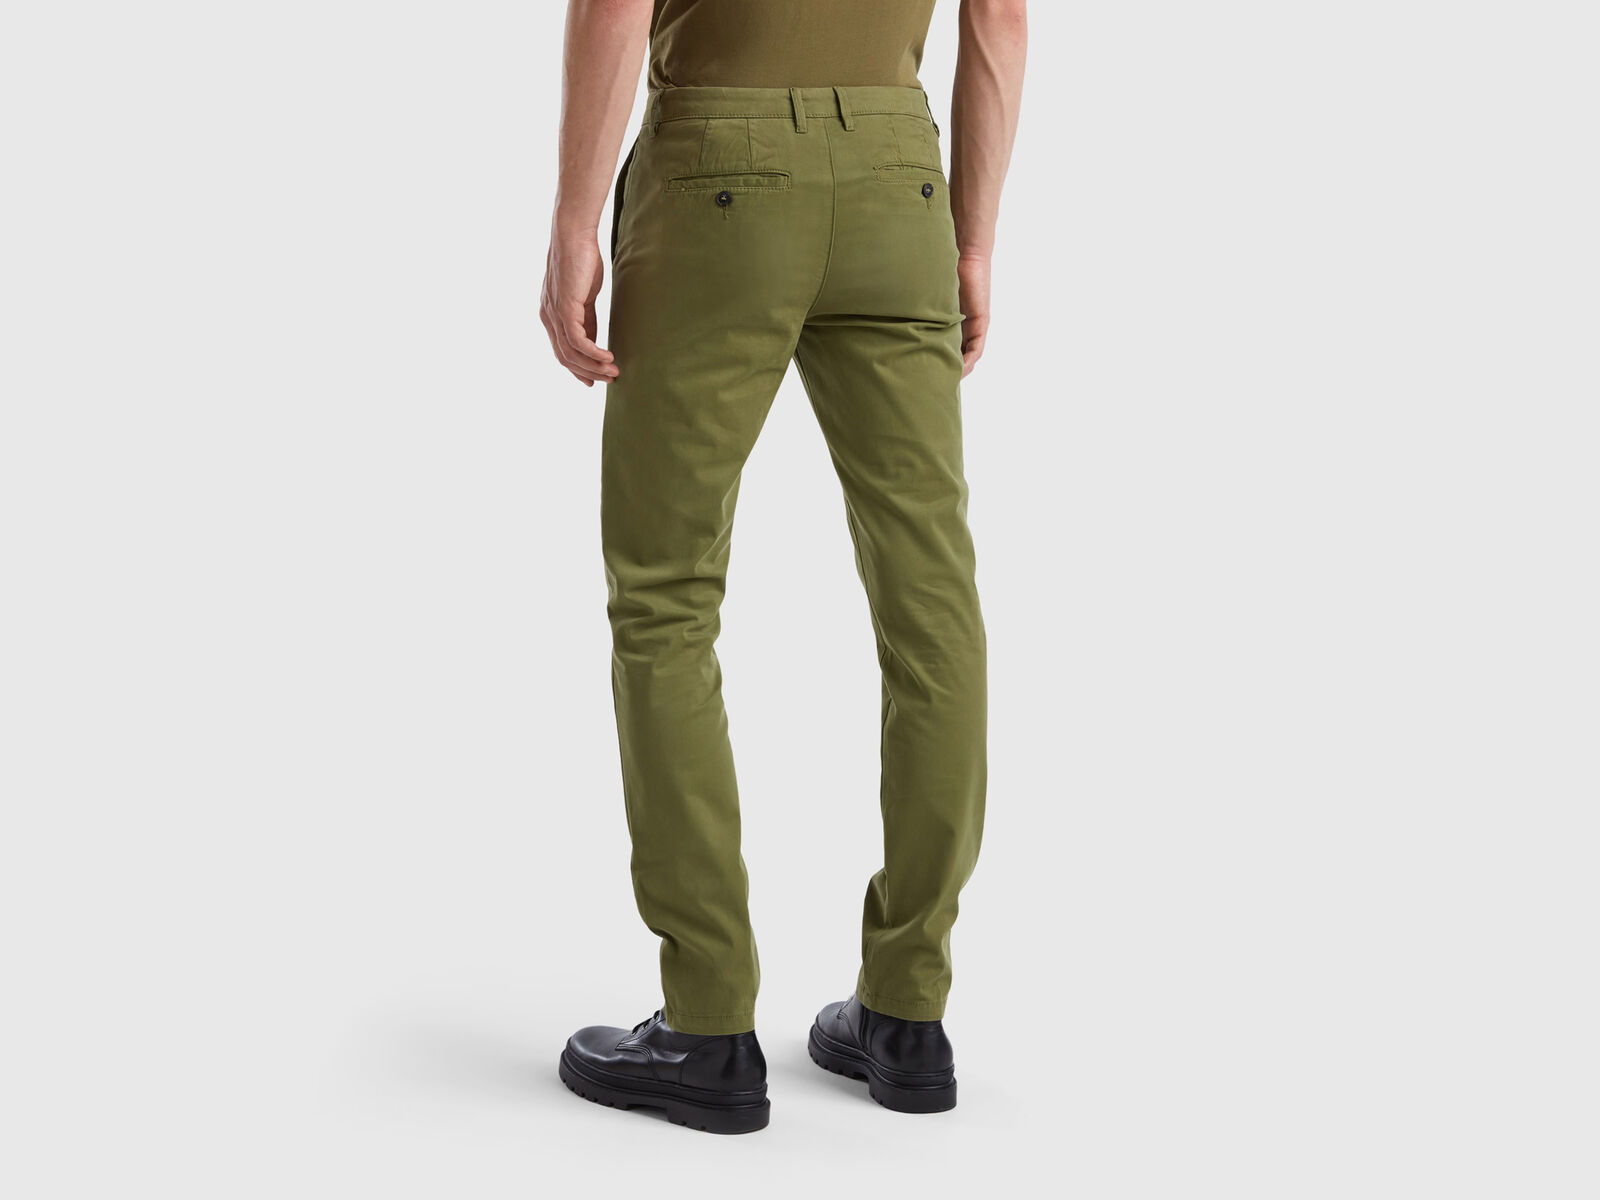 Benetton, Military Green Slim Fit Chinos, Size 42, Military Green, Men